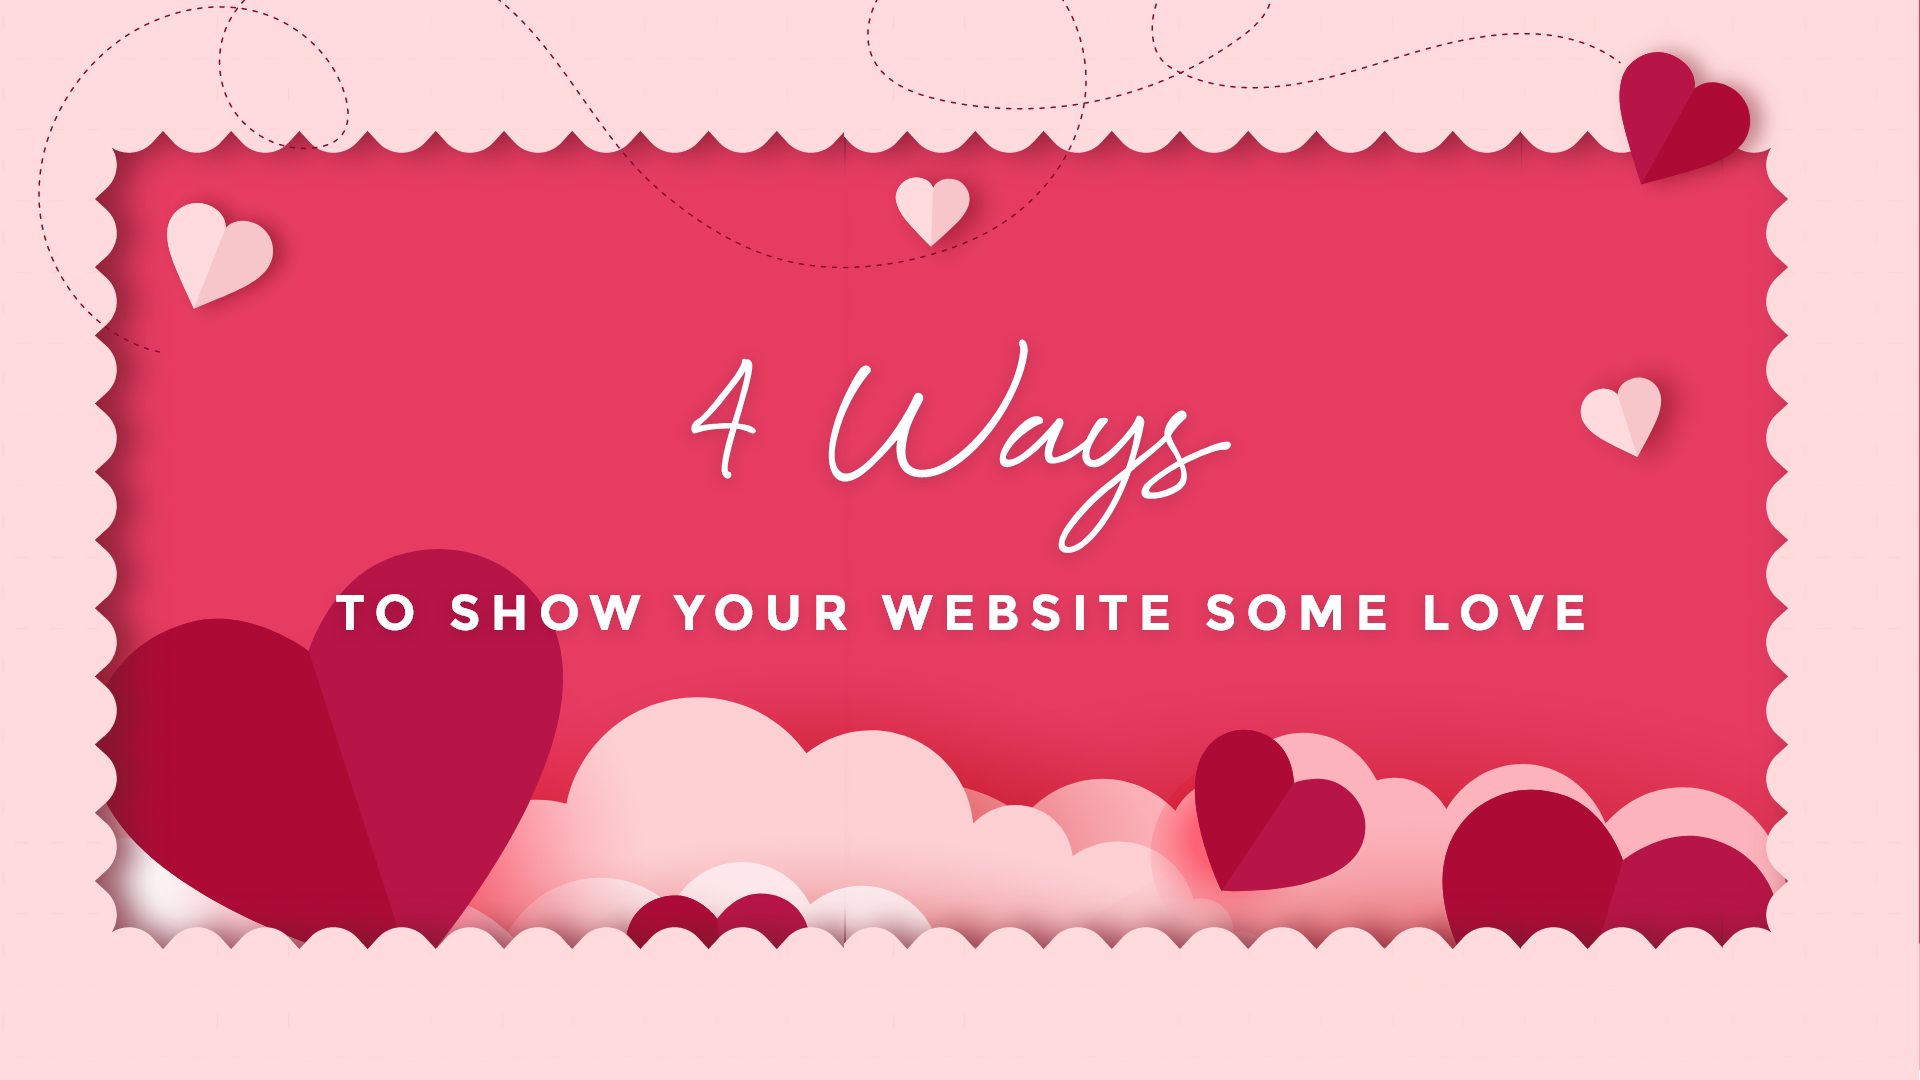 4 Ways to Show Your Website Some Love